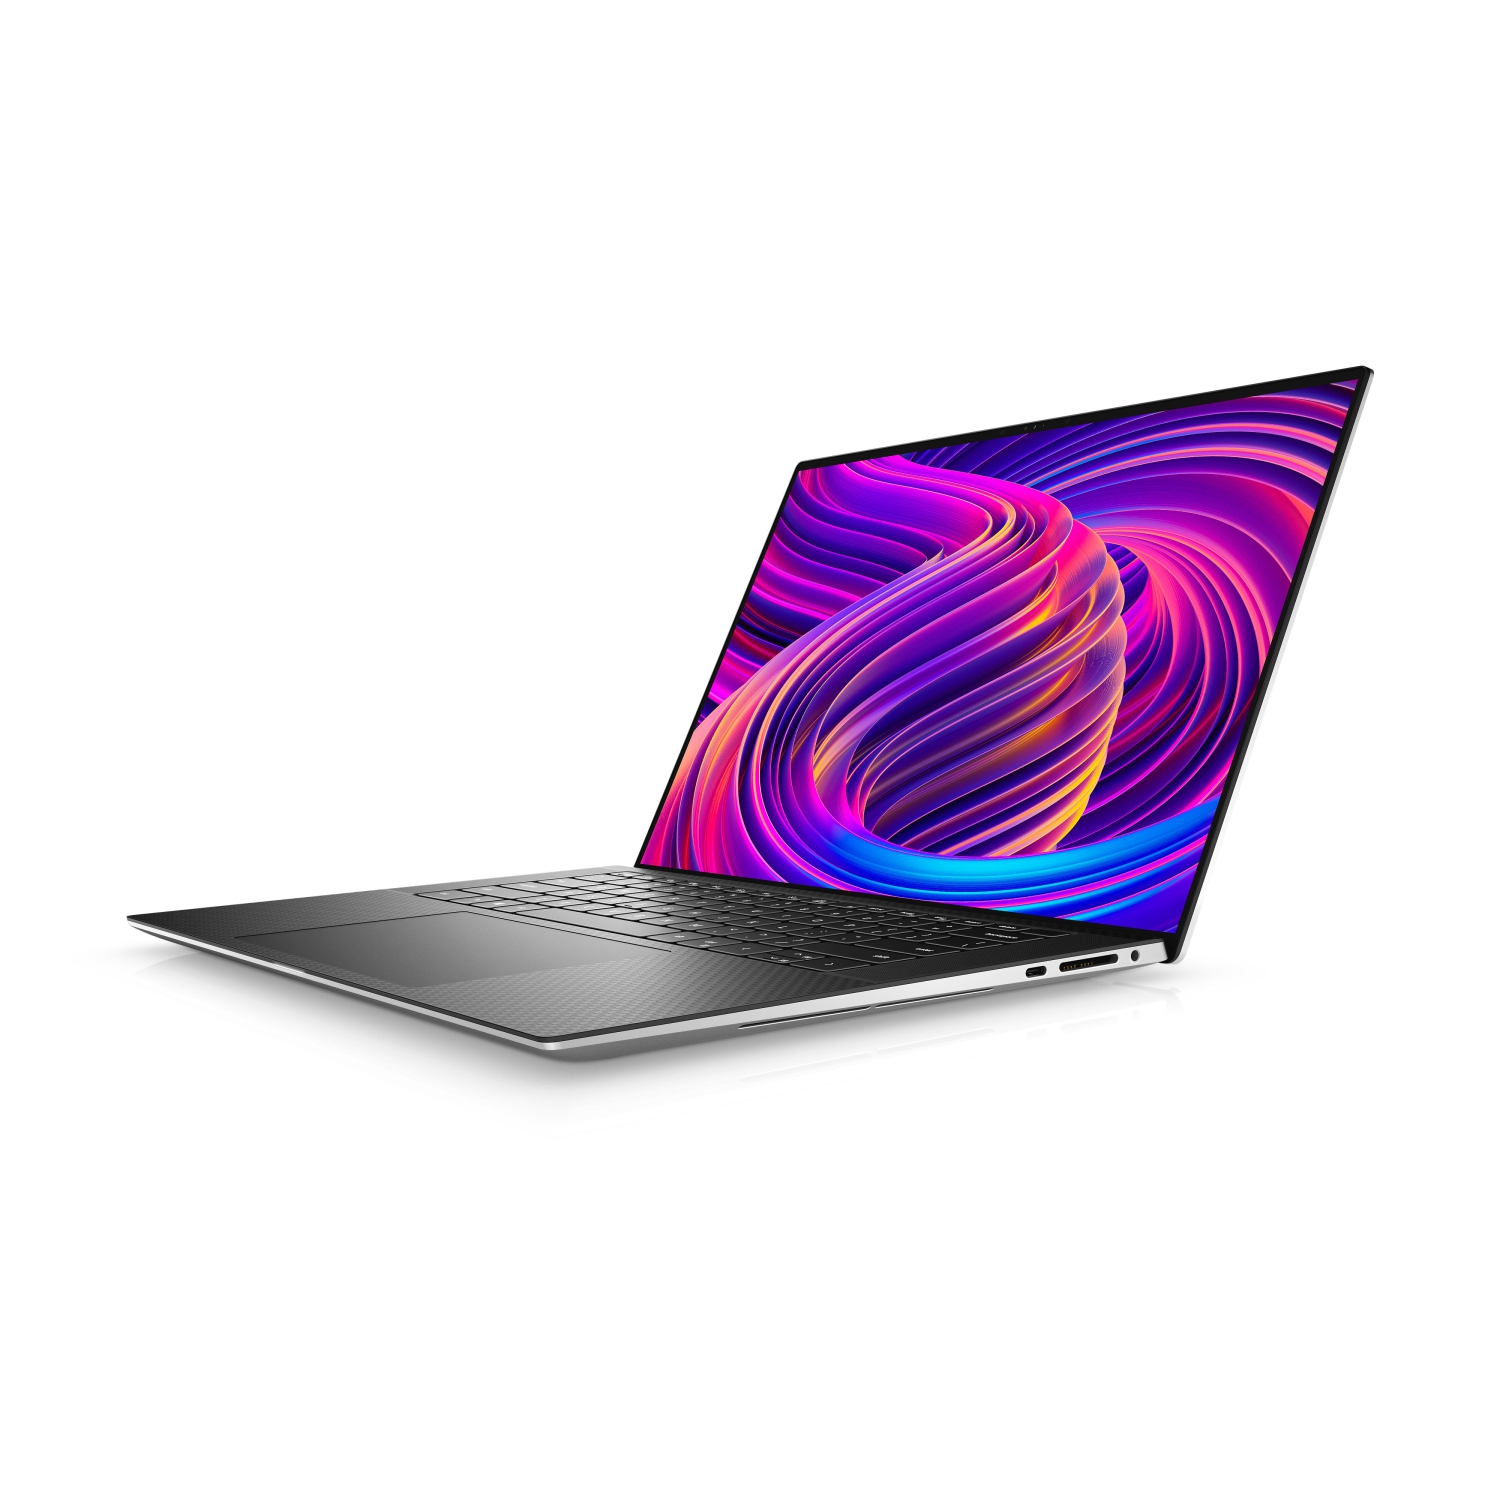 Refurbished (Excellent) - Dell XPS 15 9510 Laptop (2021), 15.6" 4K Touch, Core i9 - 512GB SSD - 16GB RAM - 3050 Ti, 8 Cores @ 4.9 GHz - 11th Gen CPU Certified Refurbished